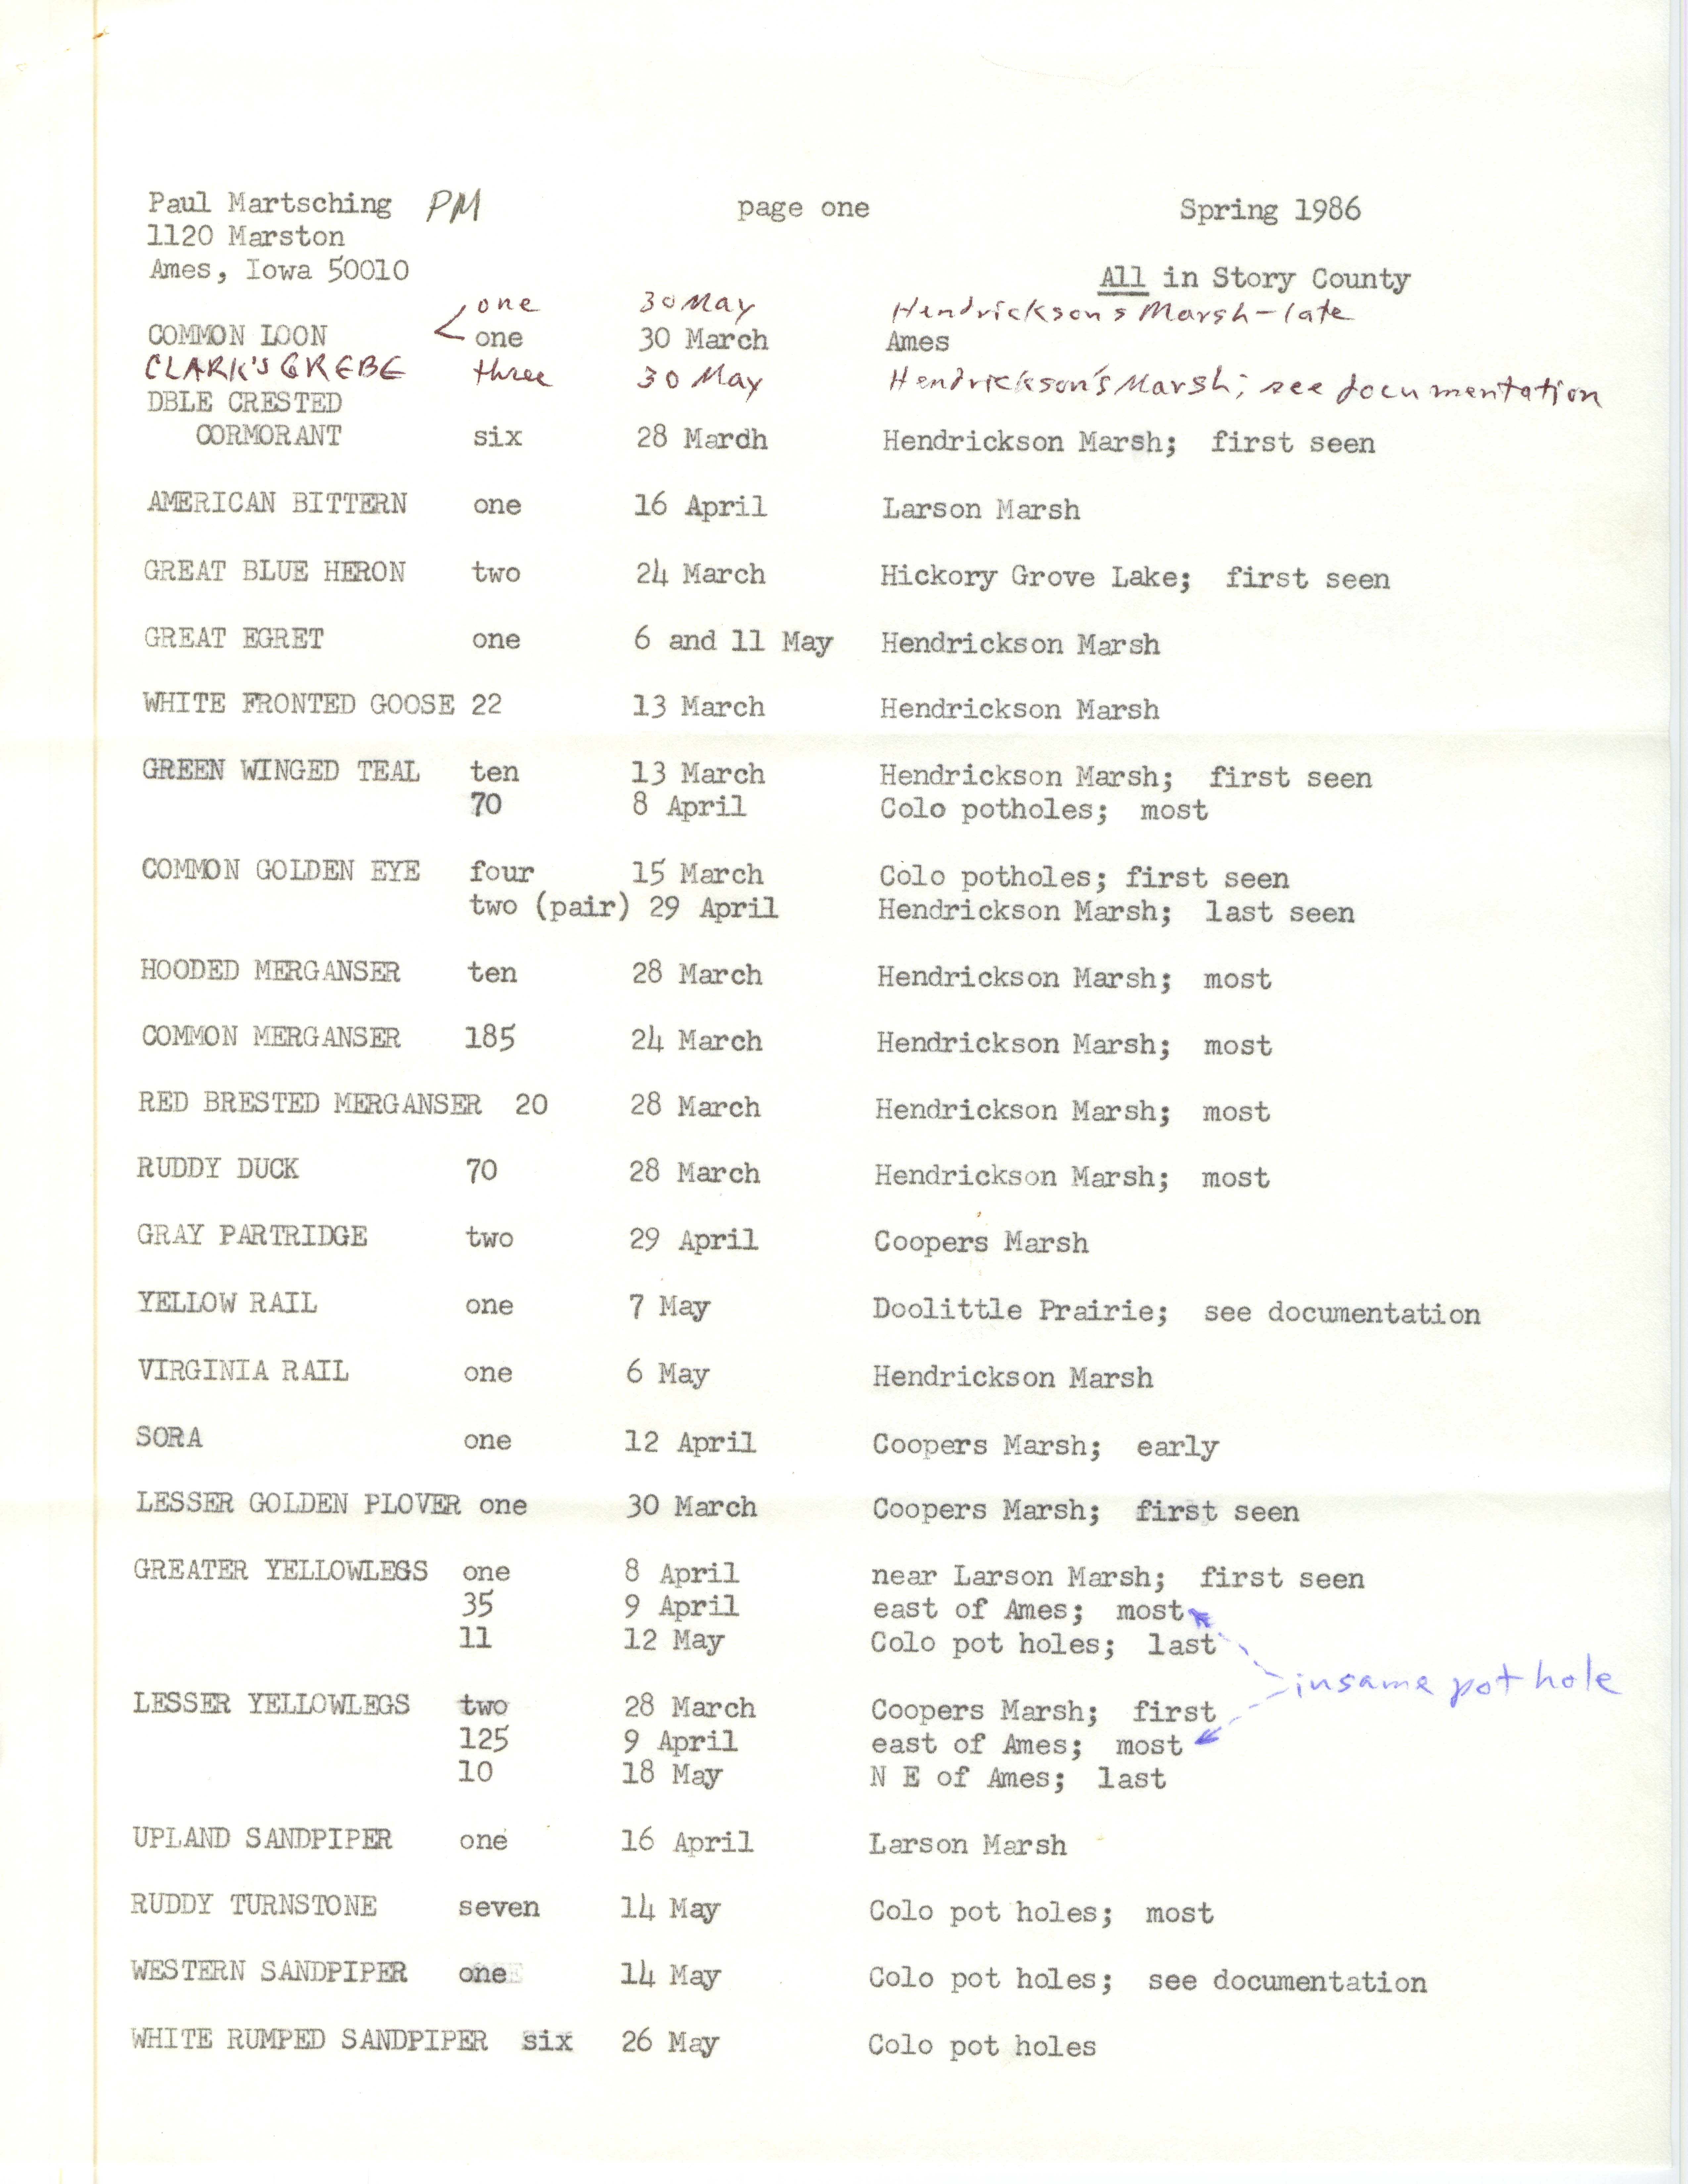 Annotated bird sighting list for Spring 1986 compiled by Paul Martsching